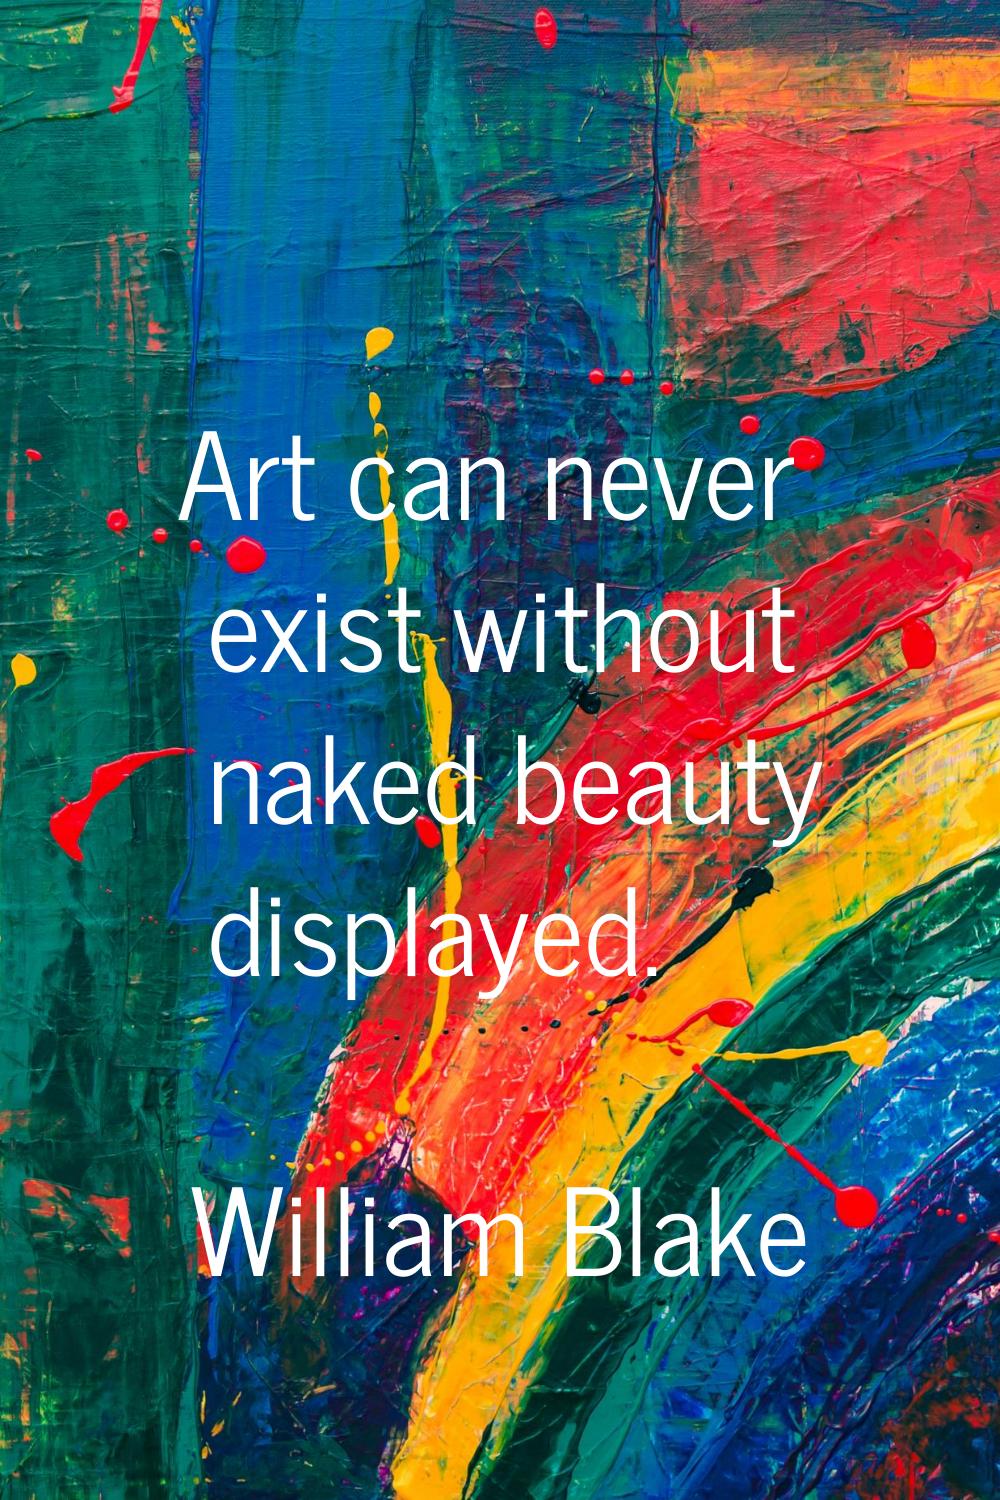 Art can never exist without naked beauty displayed.